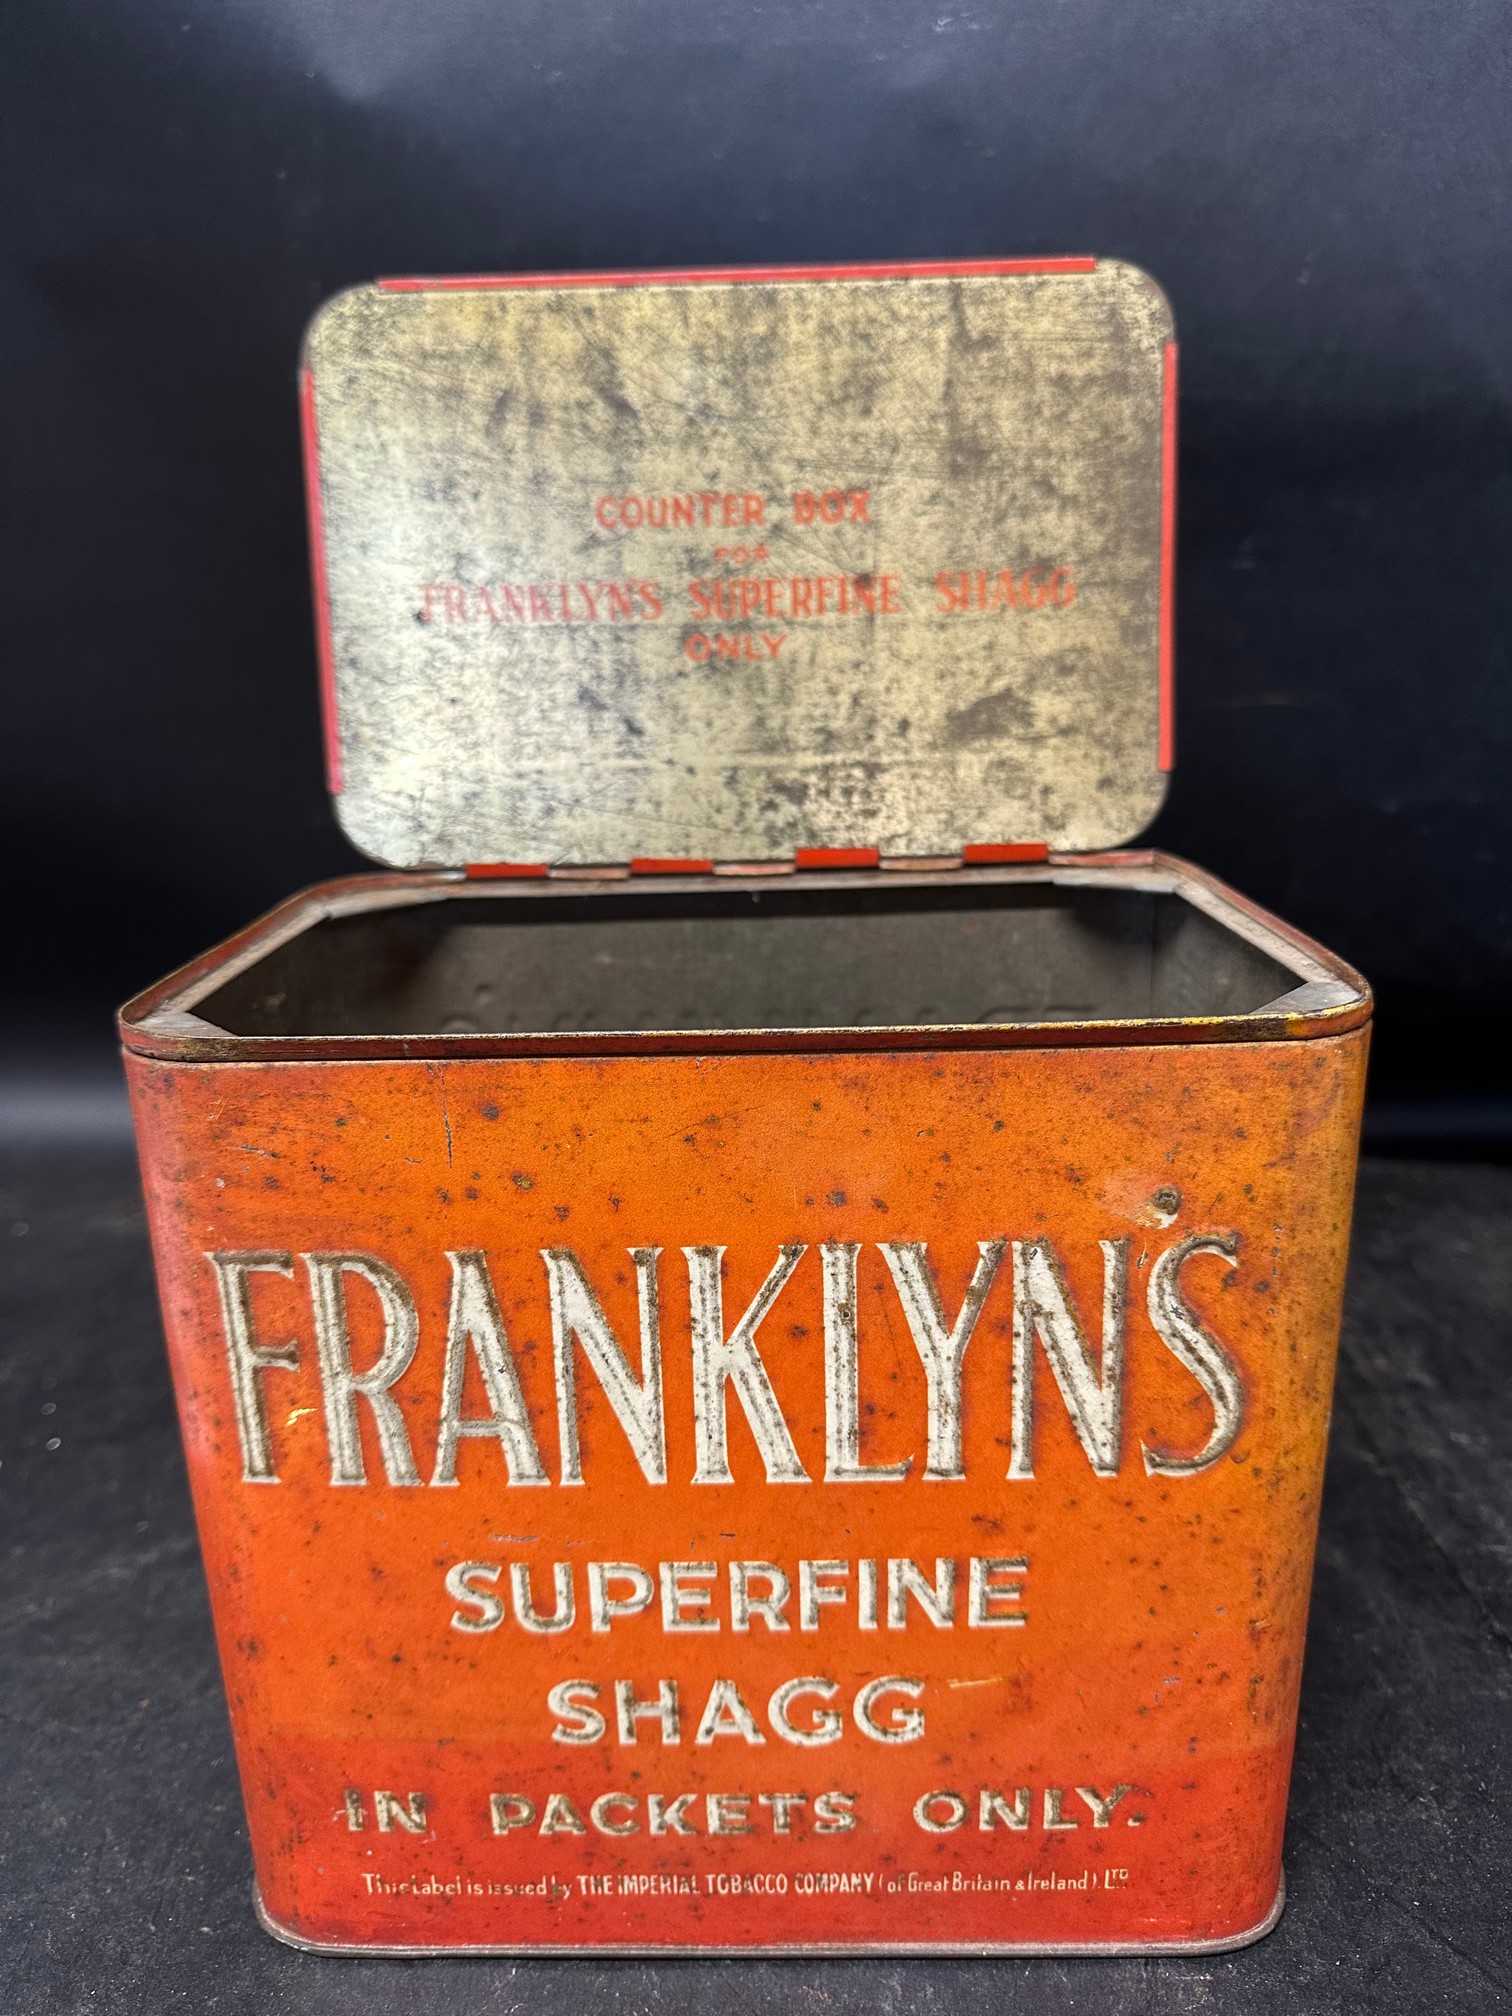 A Frankly's Superfine Shagg 'in packets only' counter box, issued by The Imperial Tobacco Co. - Image 7 of 8